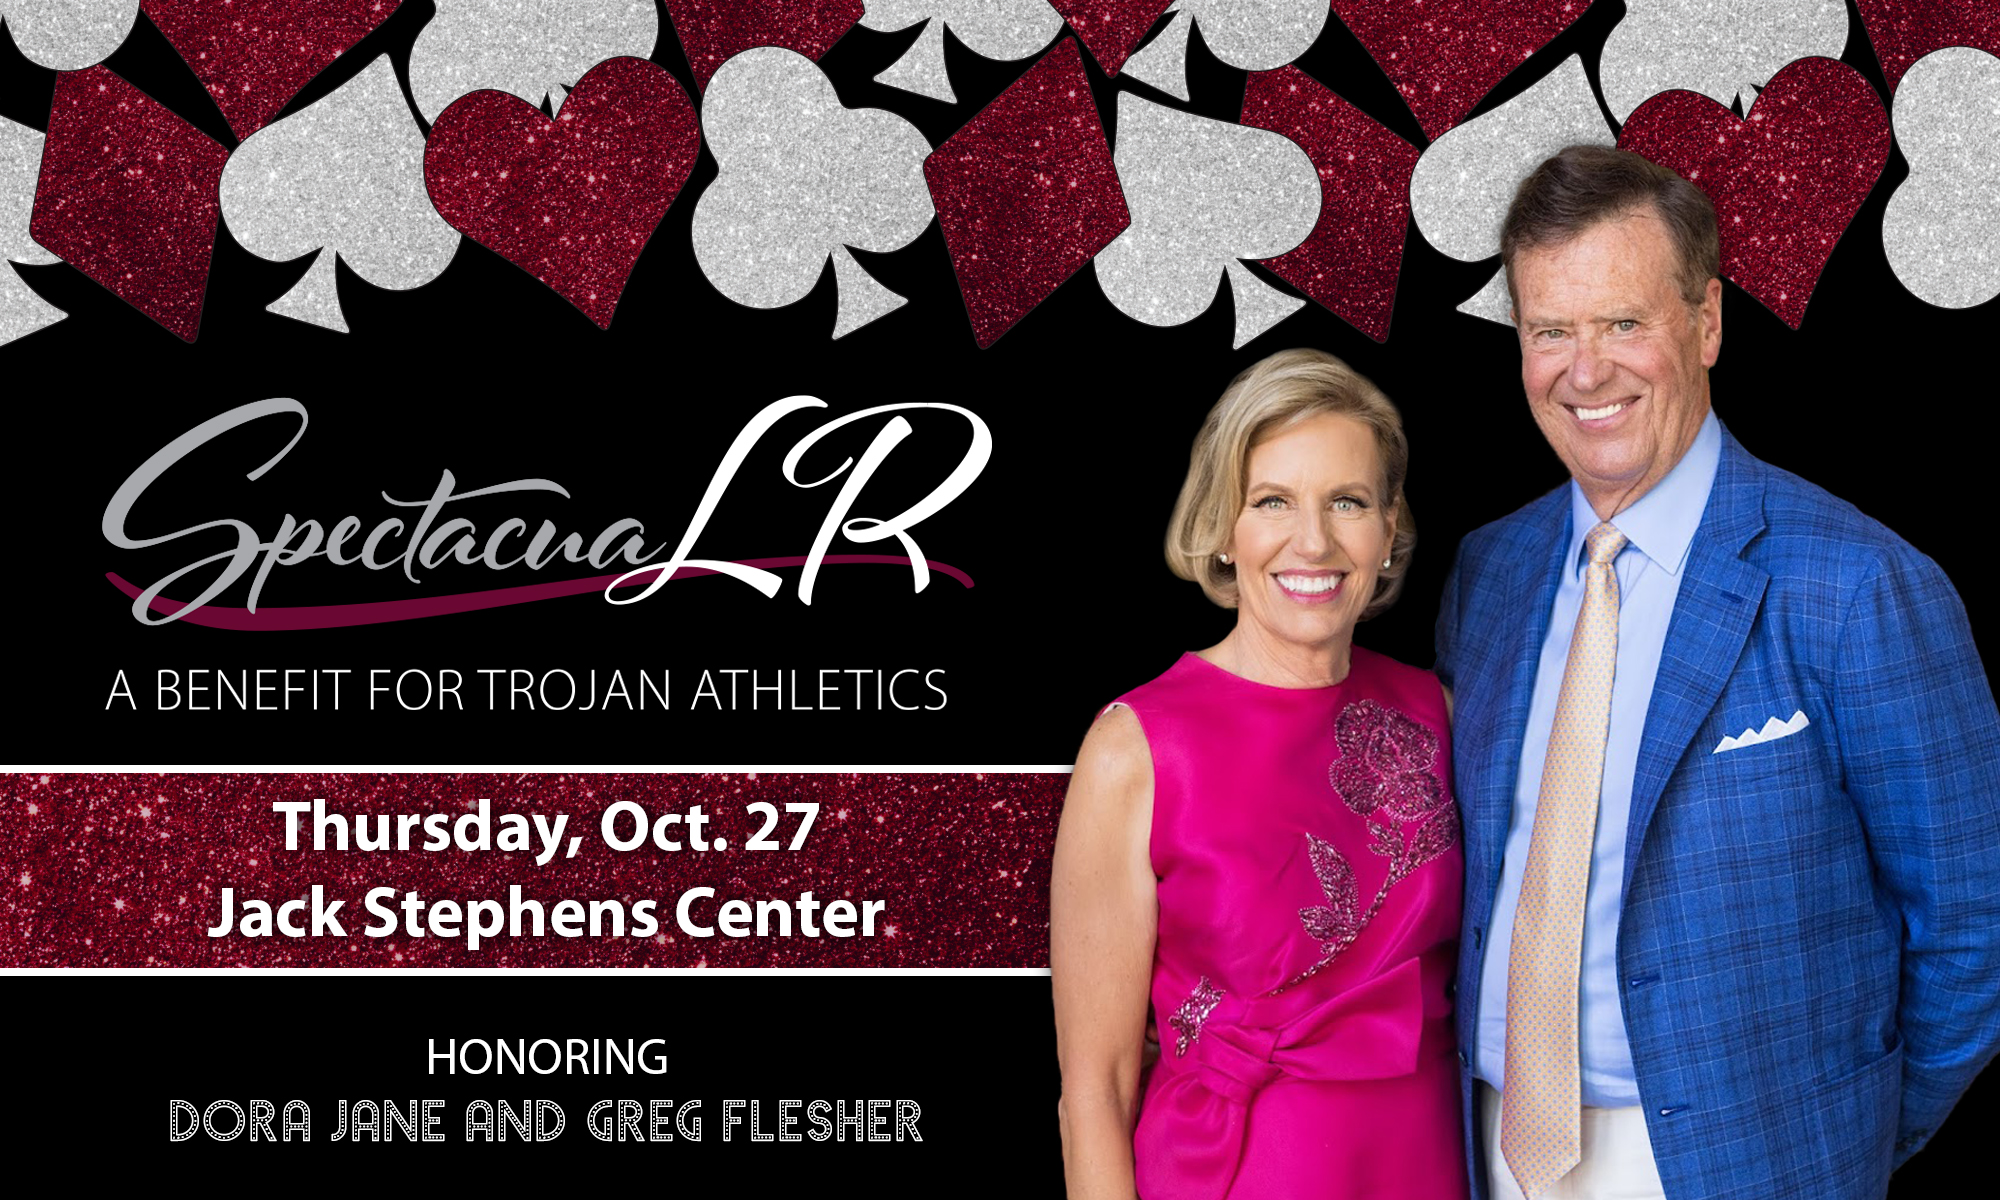 Little Rock Athletics is proud to announce that Dora Jane and Greg Flesher will serve as the honorees for the 14th Annual SpectacuaLR event benefitting Trojan Athletics.